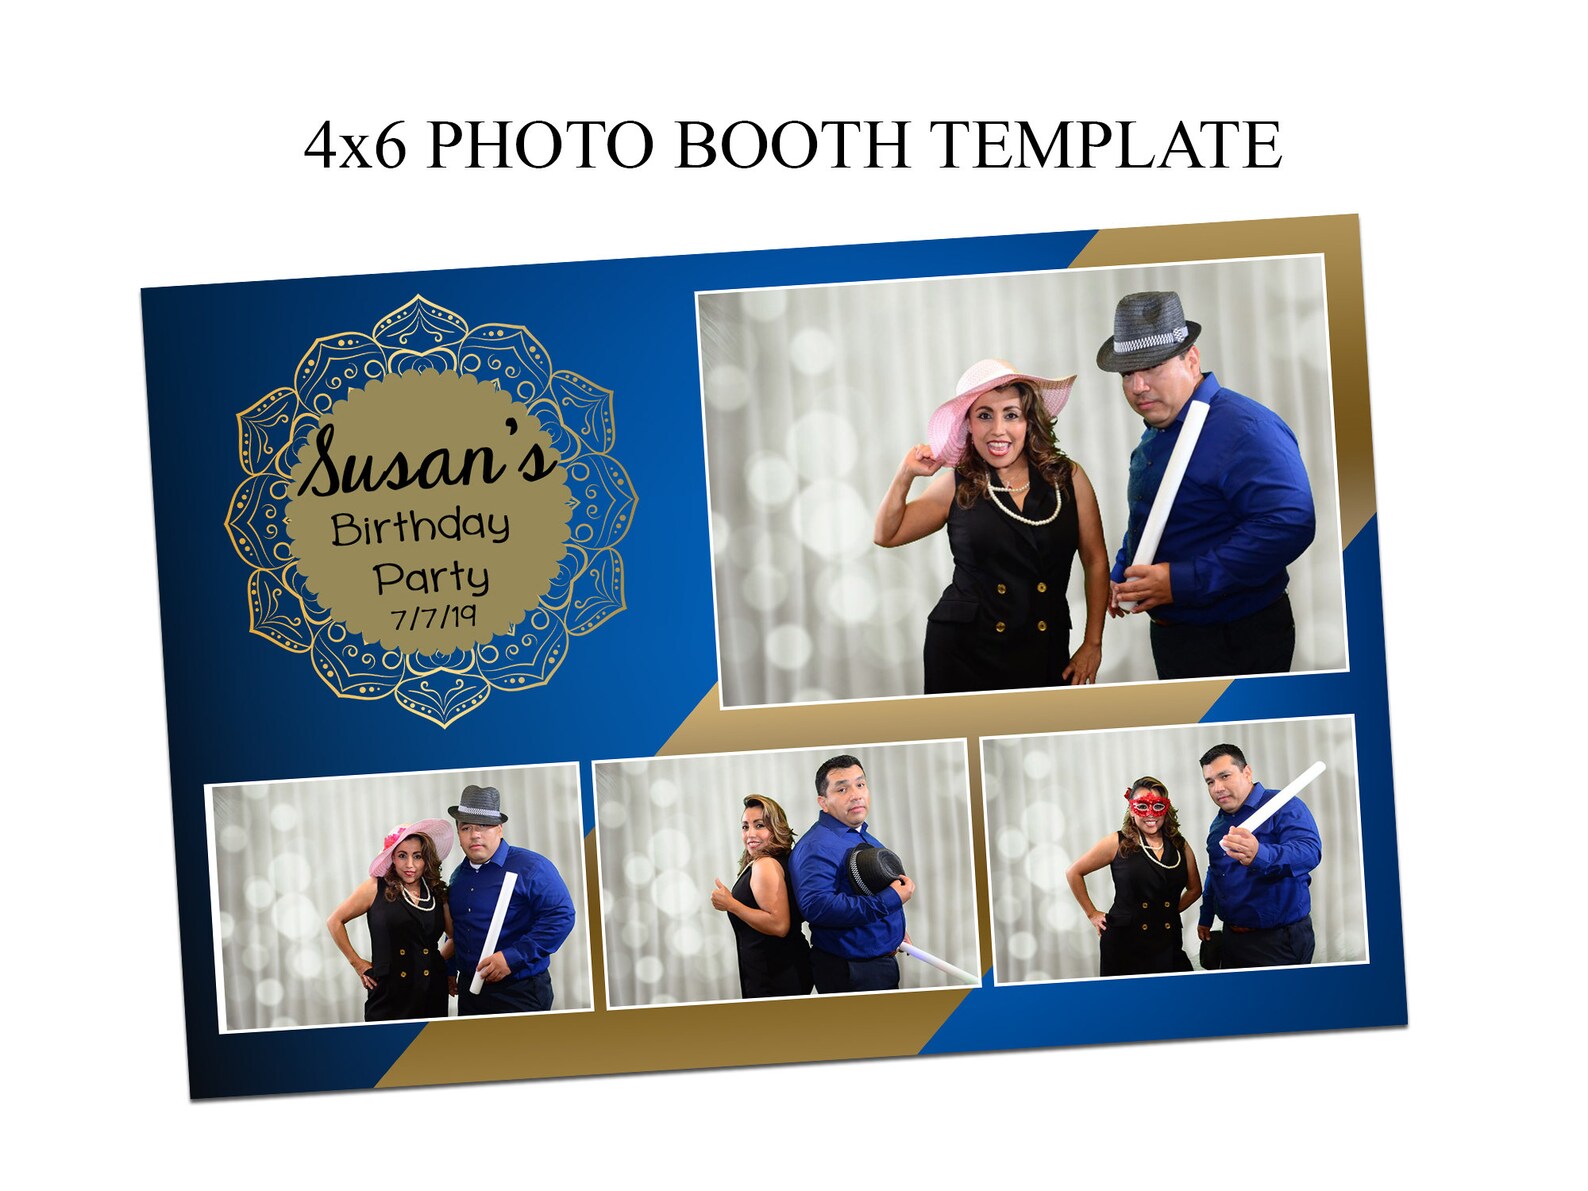 photo-booth-template-4x6-wedding-photo-booth-template-xv-etsy-ireland